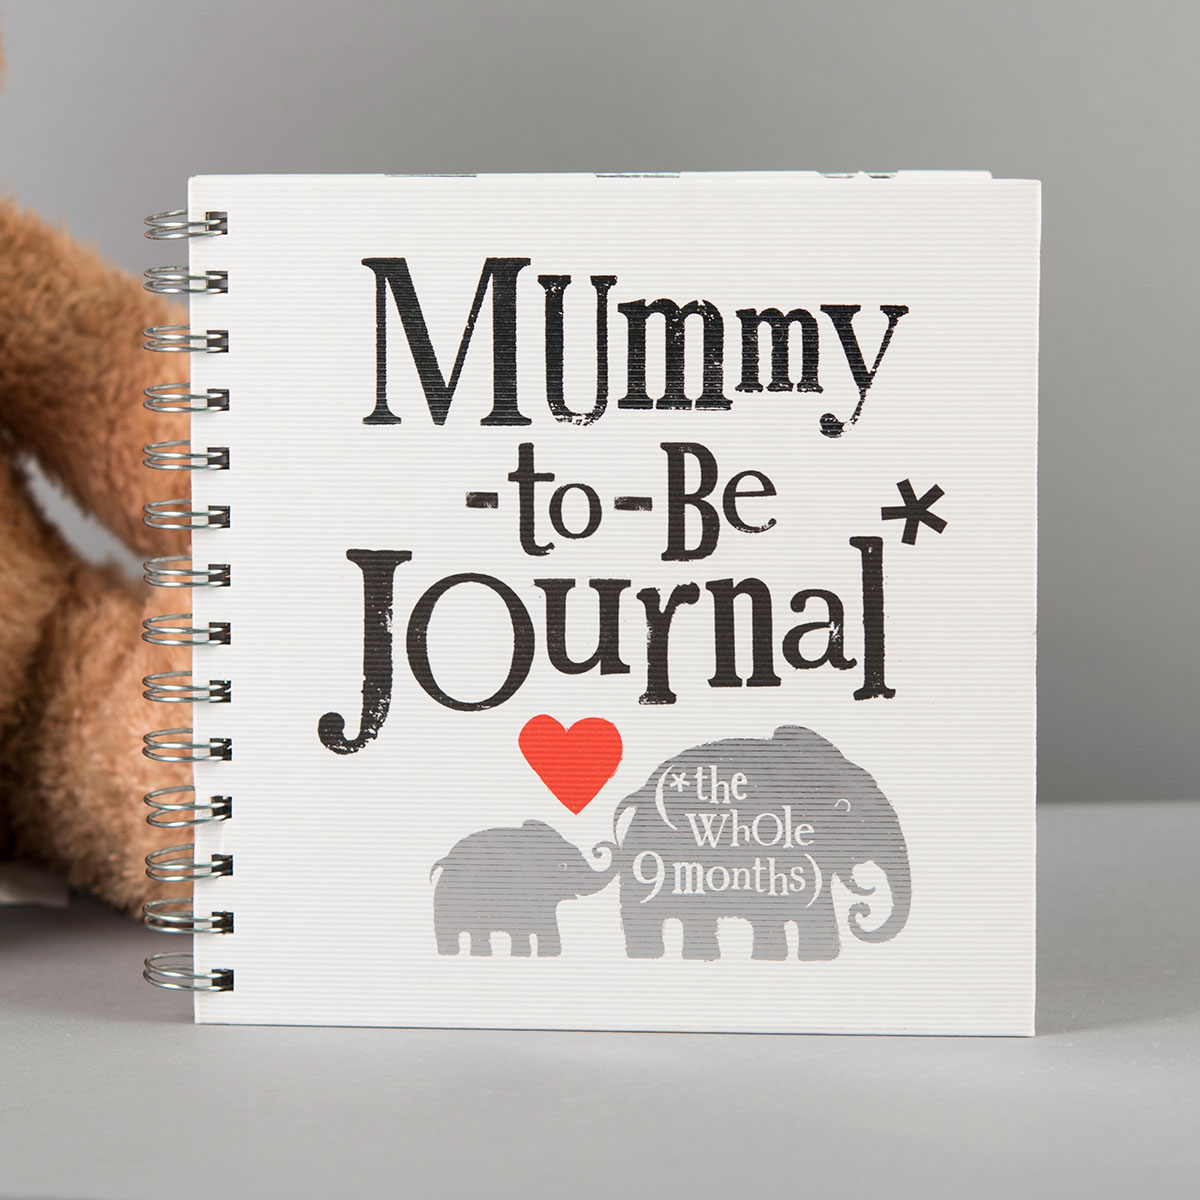 Mummy To Be Journal 